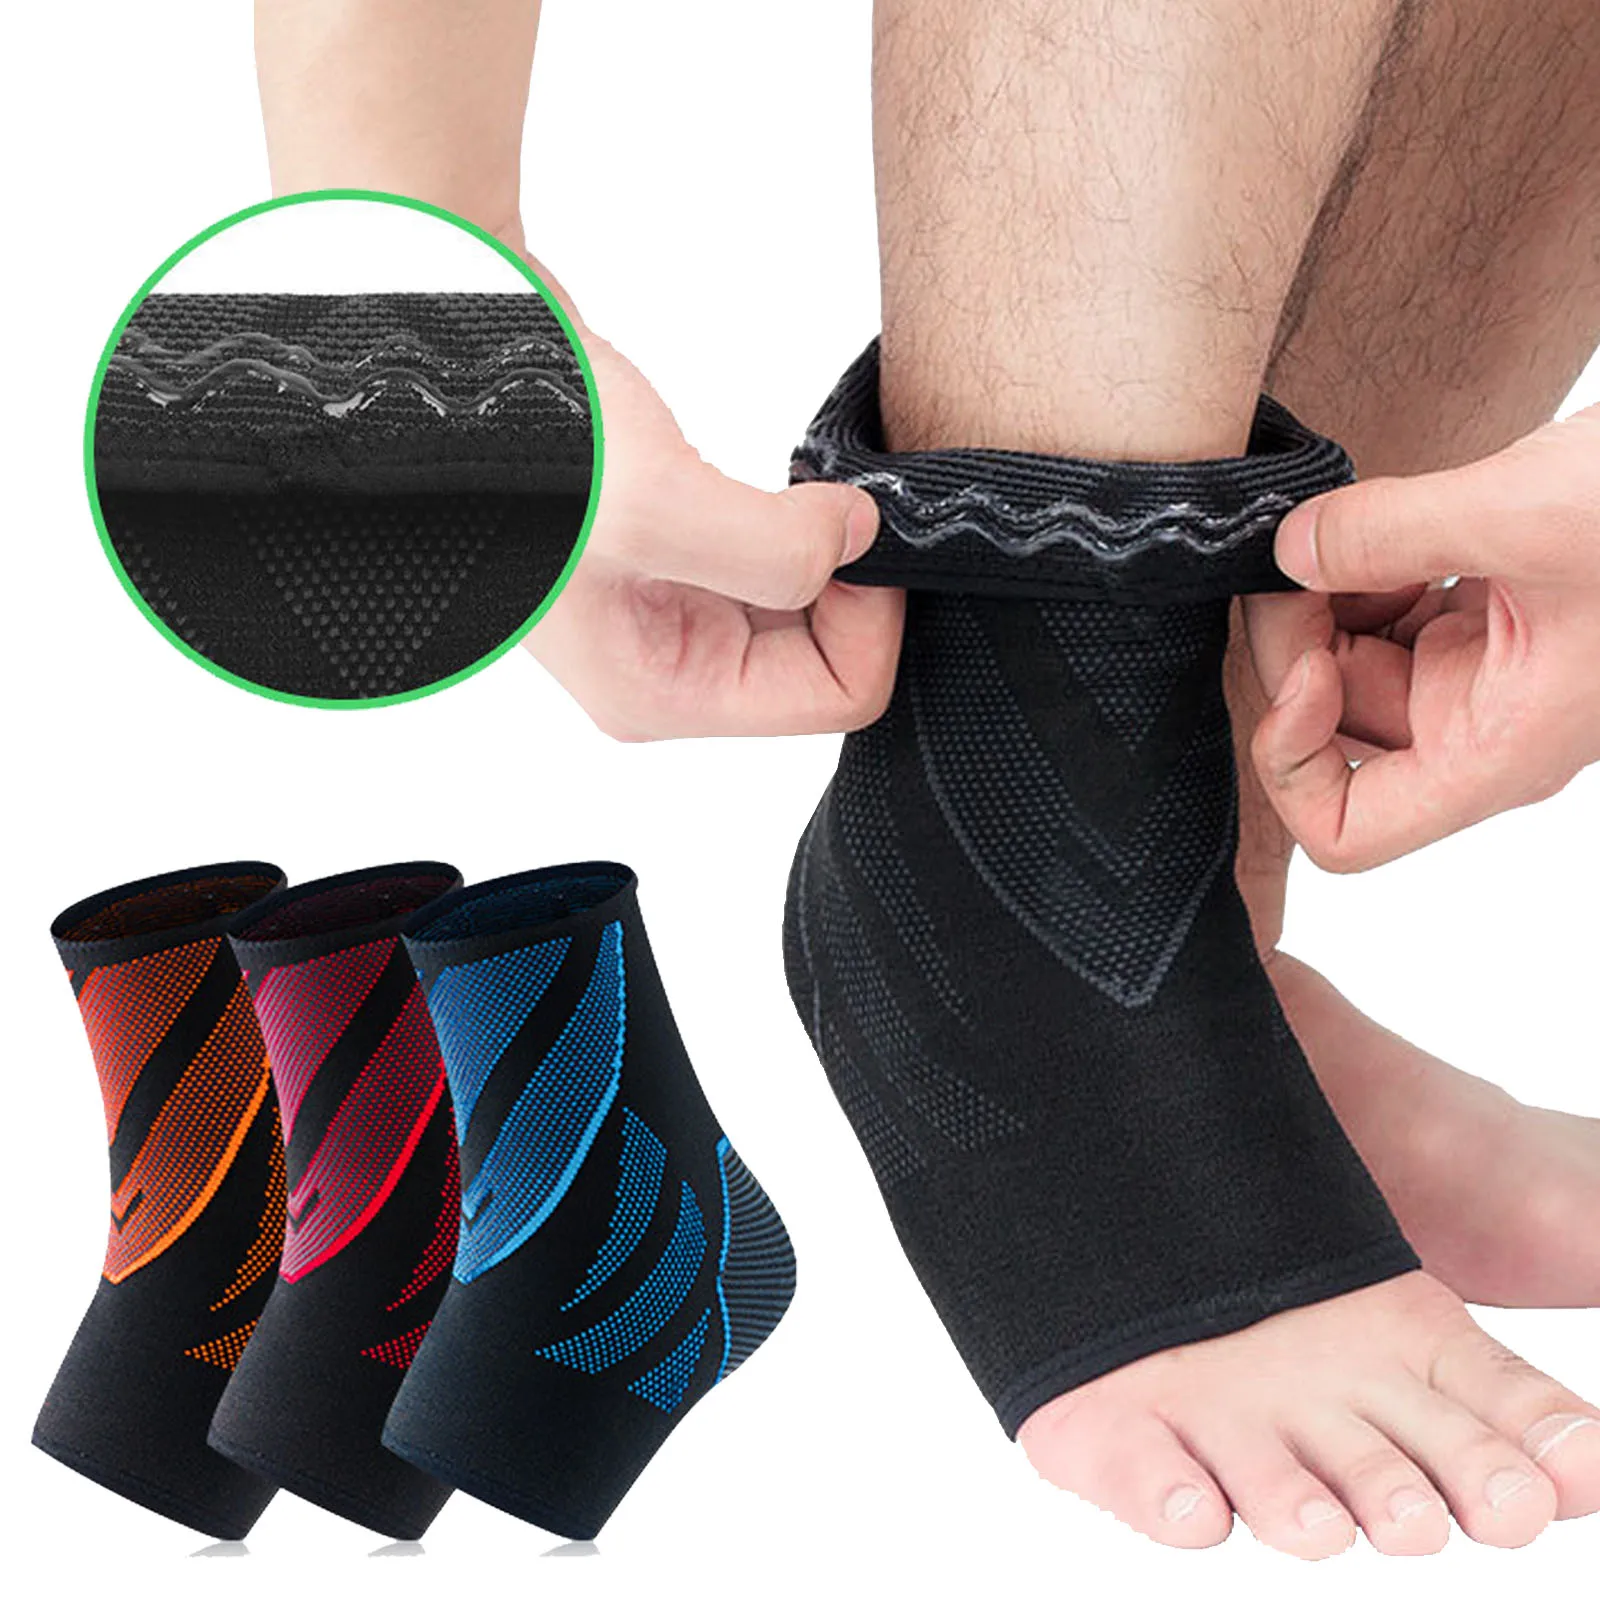 1Pairs Ankle Brace Compression Sleeves for Football Ankle Support Socks Injury Recovery Joint Pain Plantar Fasciitis Protector 1pcs ankle brace support compression strap sleeves support elastic nylon sleeve ankle protector for basketball sports